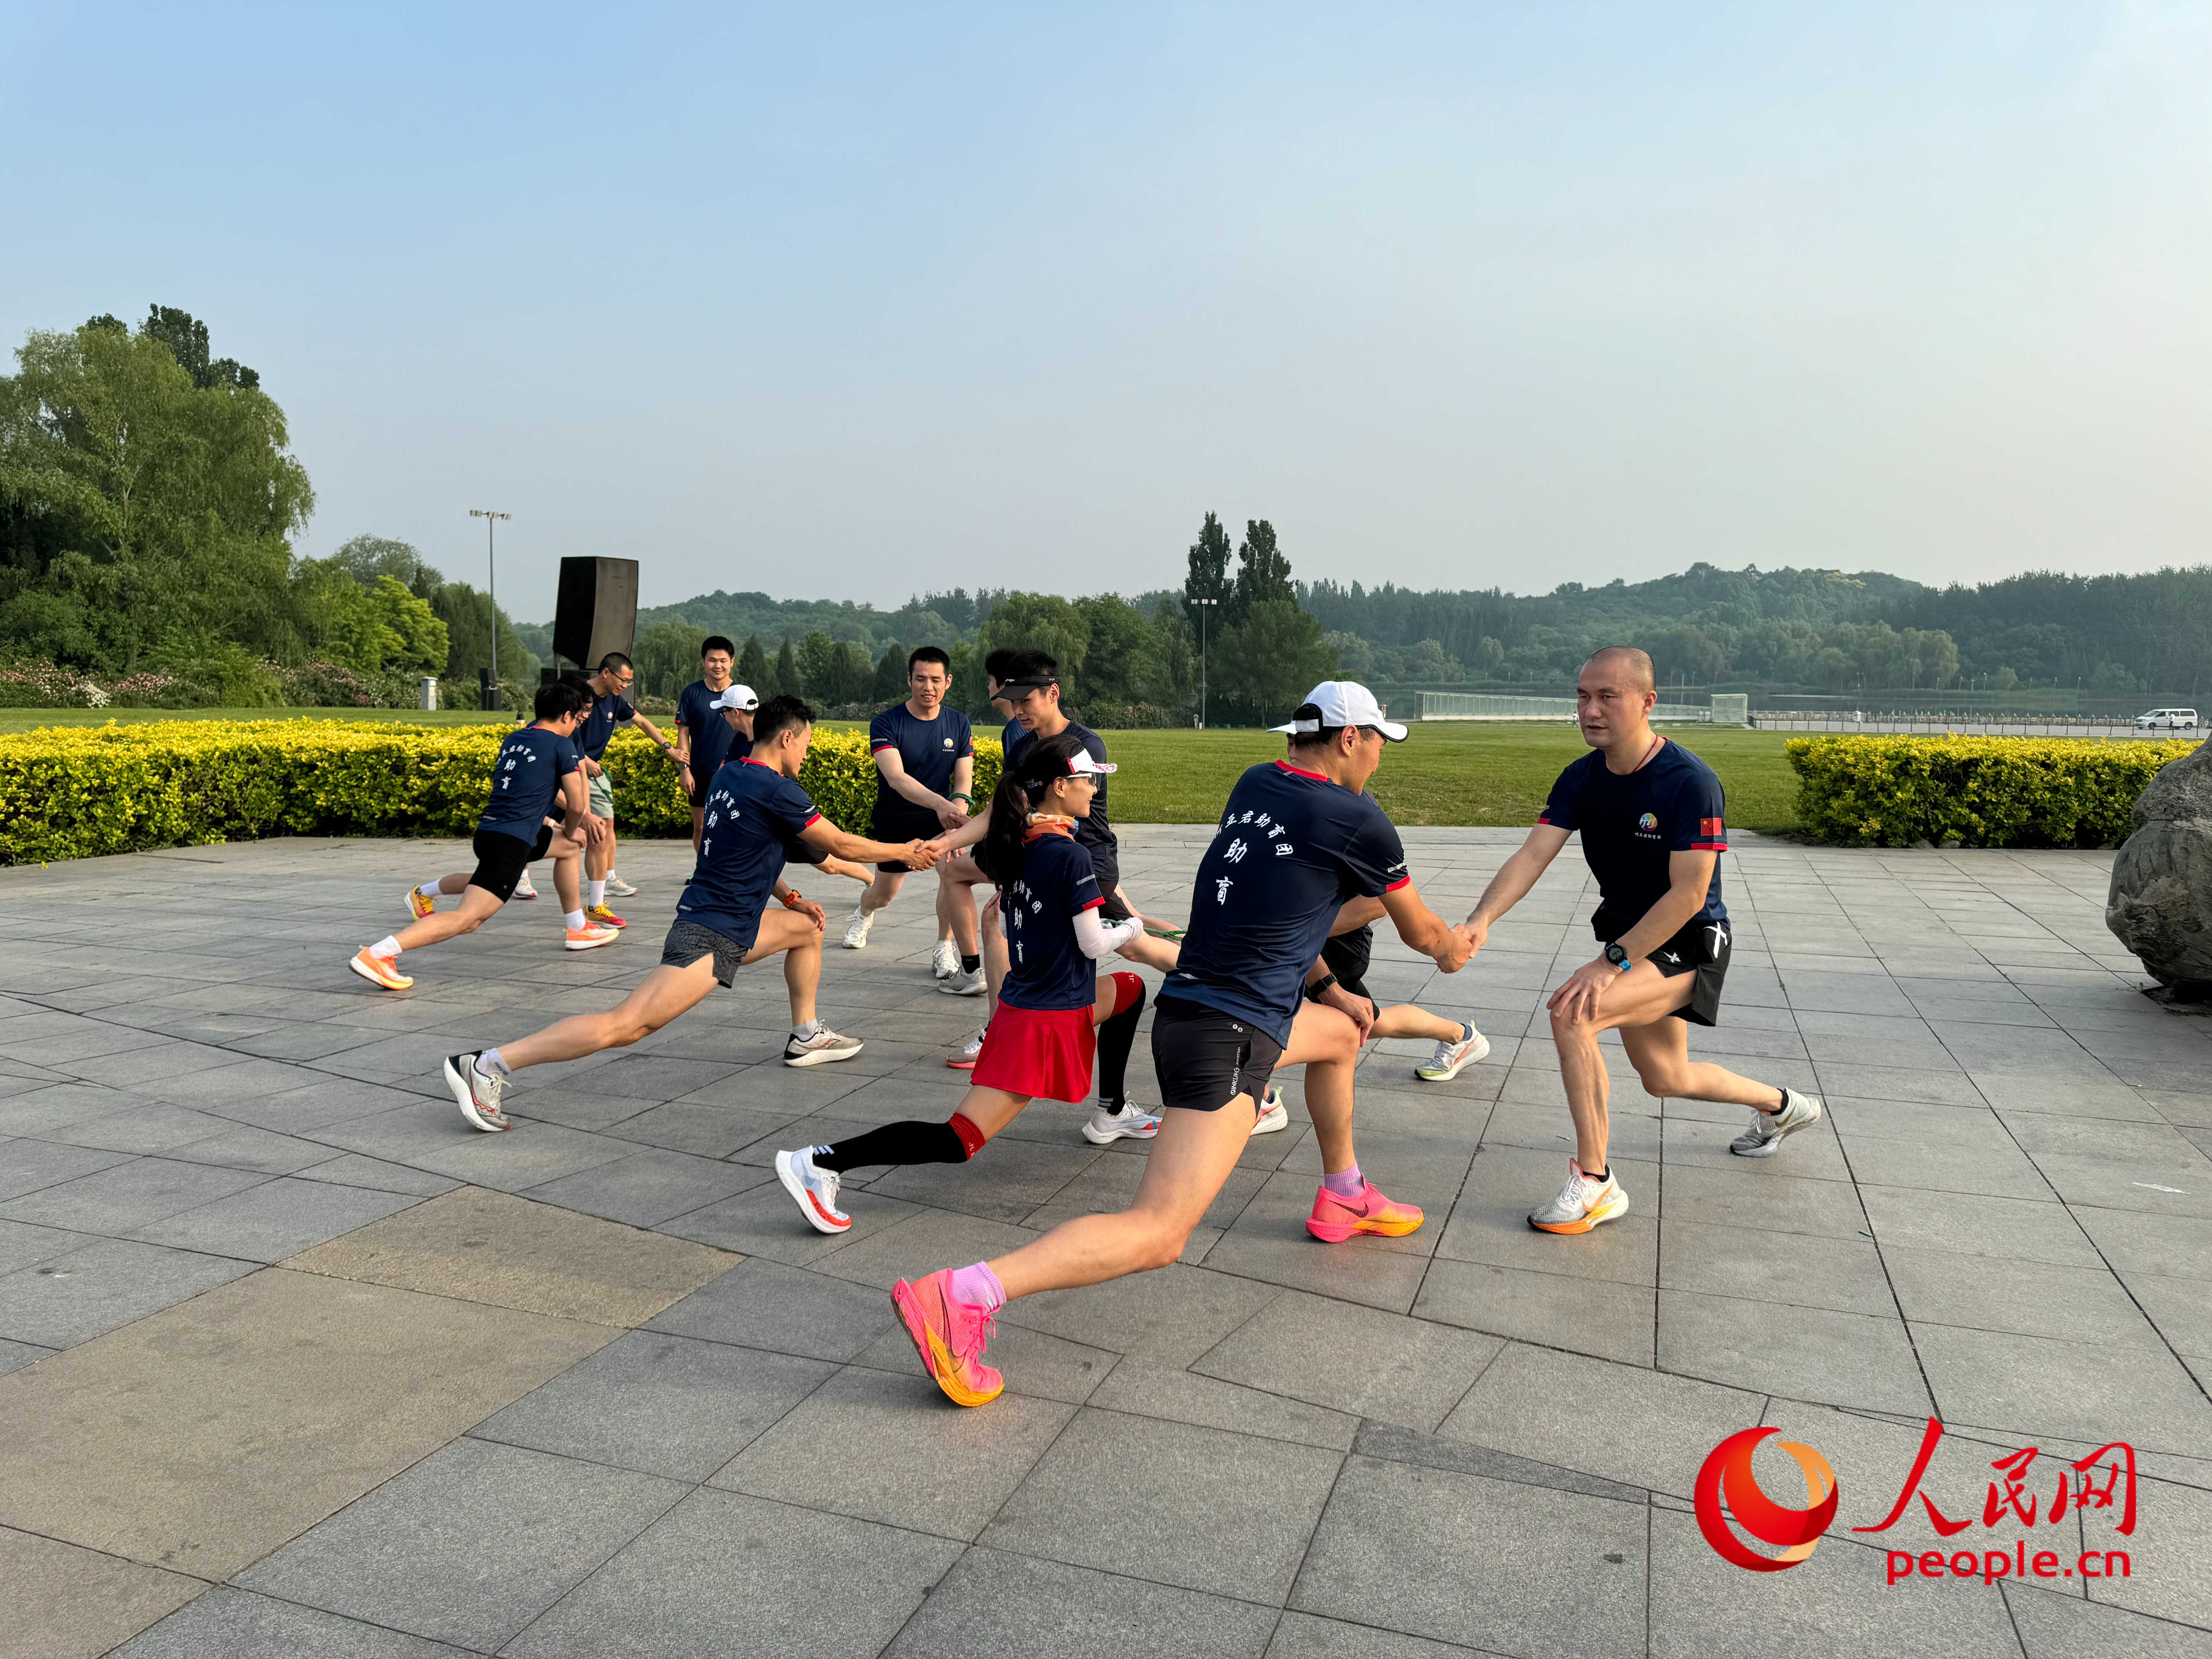  Blind people and volunteers prepare for running. Photographed by Zhou Jingyuan on People's Daily Online